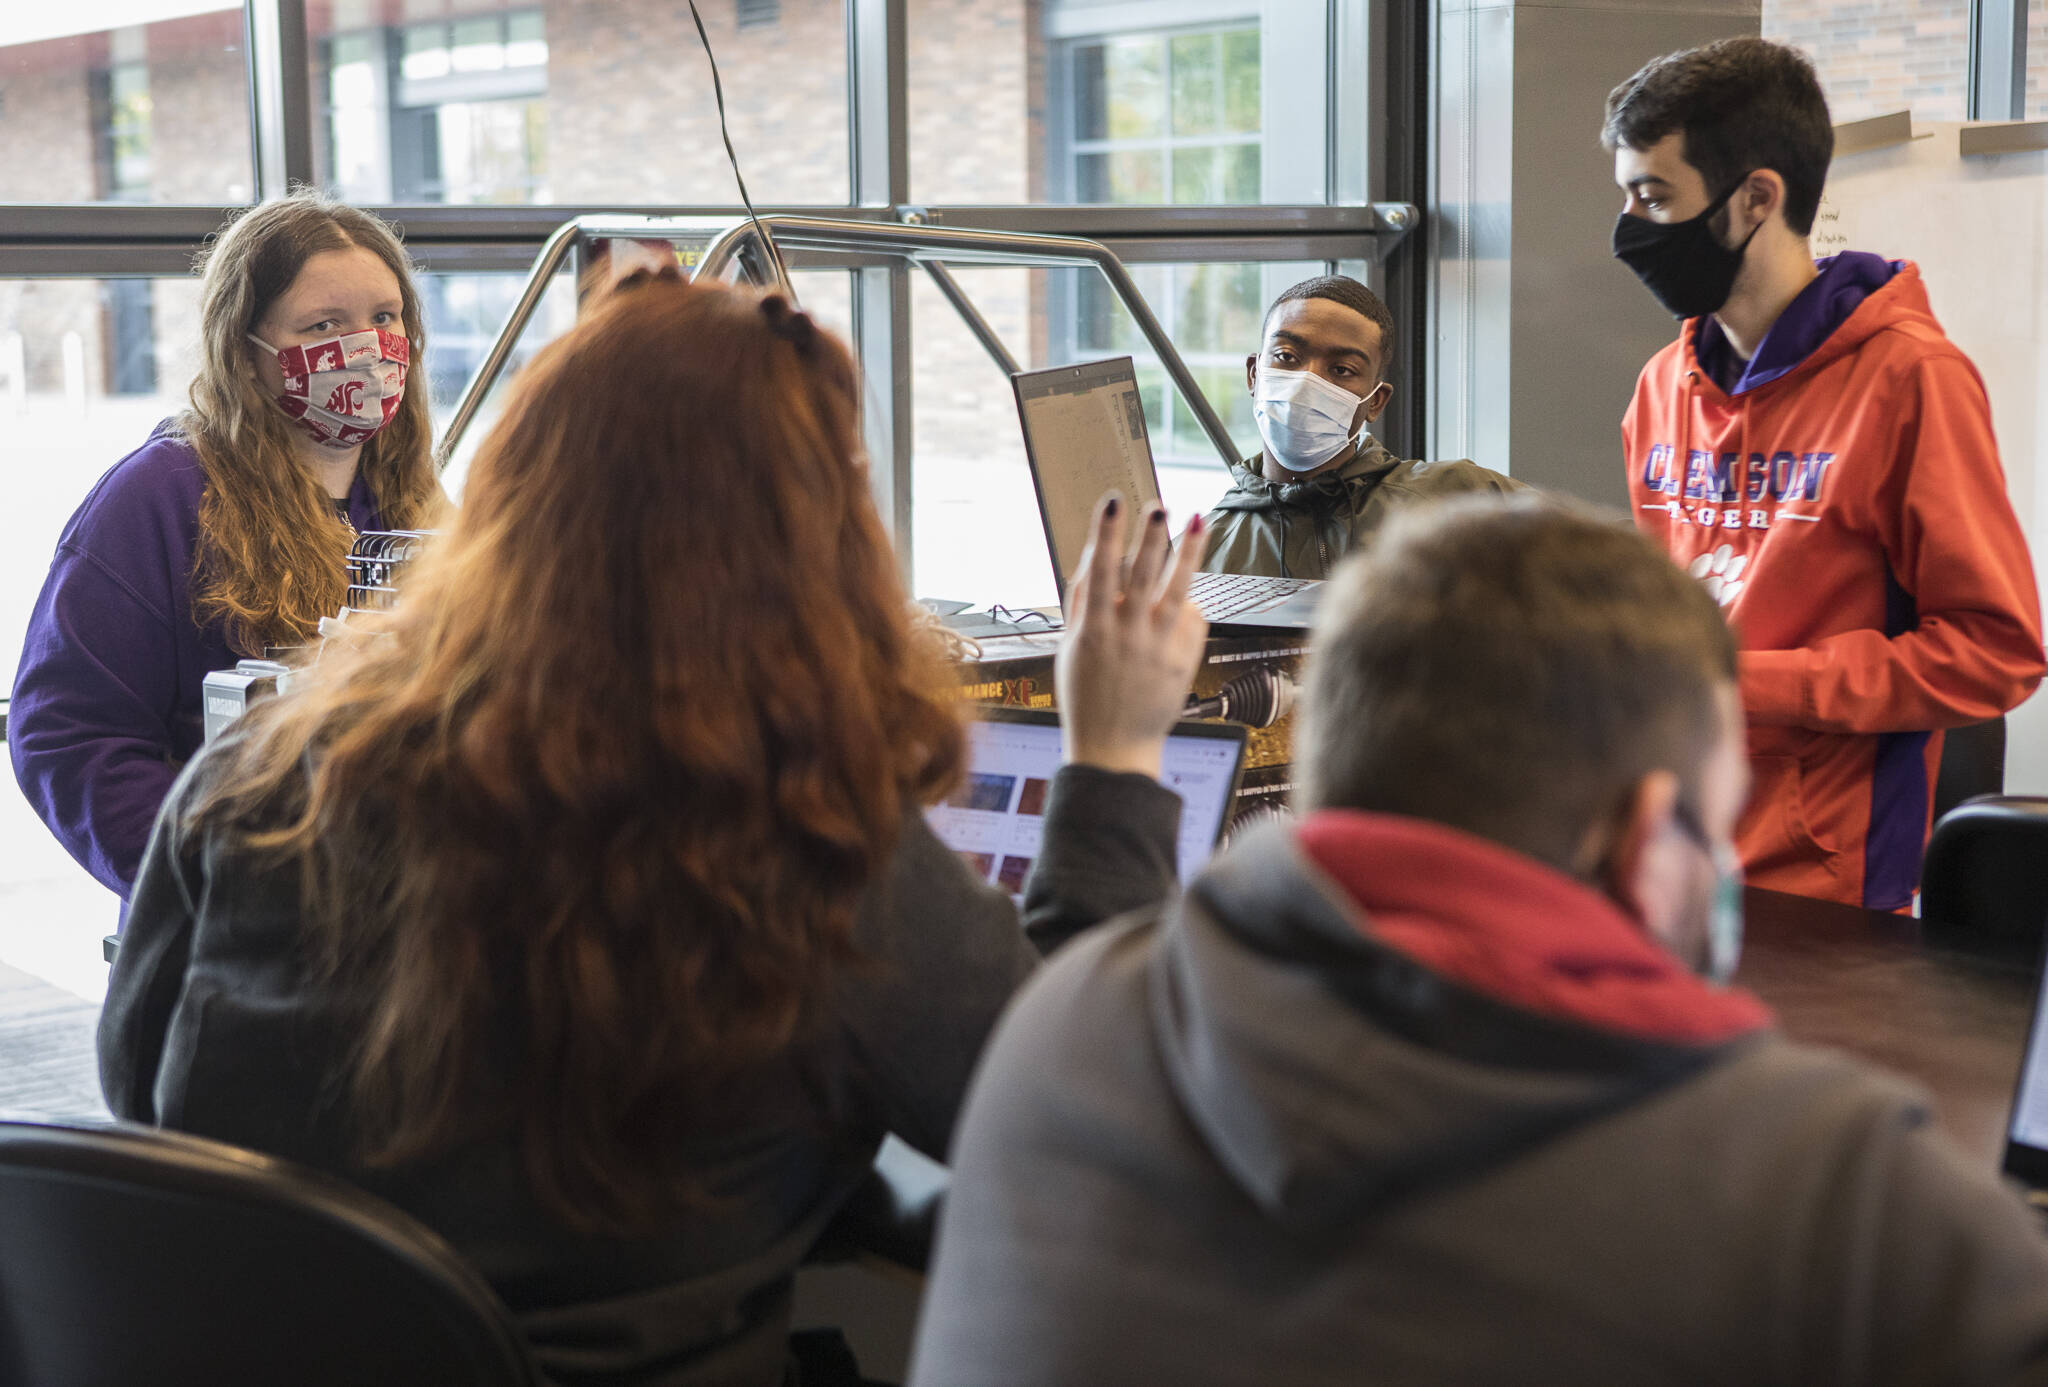 Washington State University and Clemson University students listen to Nichole Bascue, a WSU Everett student and team member, during a recent meeting in Everett. (Olivia Vanni / The Herald)